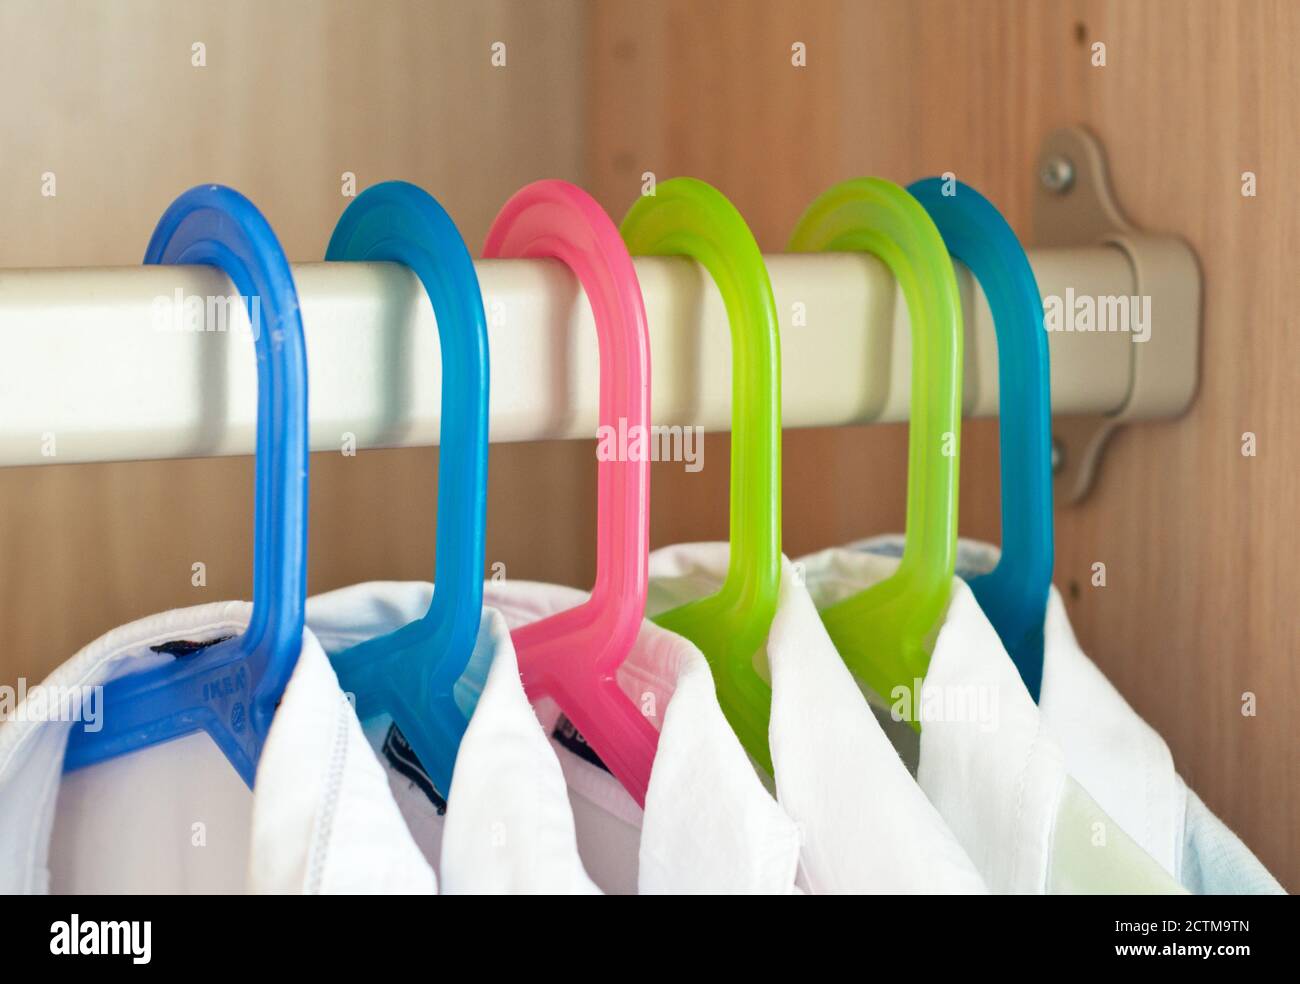 White shirts hang in the closet on hangers Stock Photo